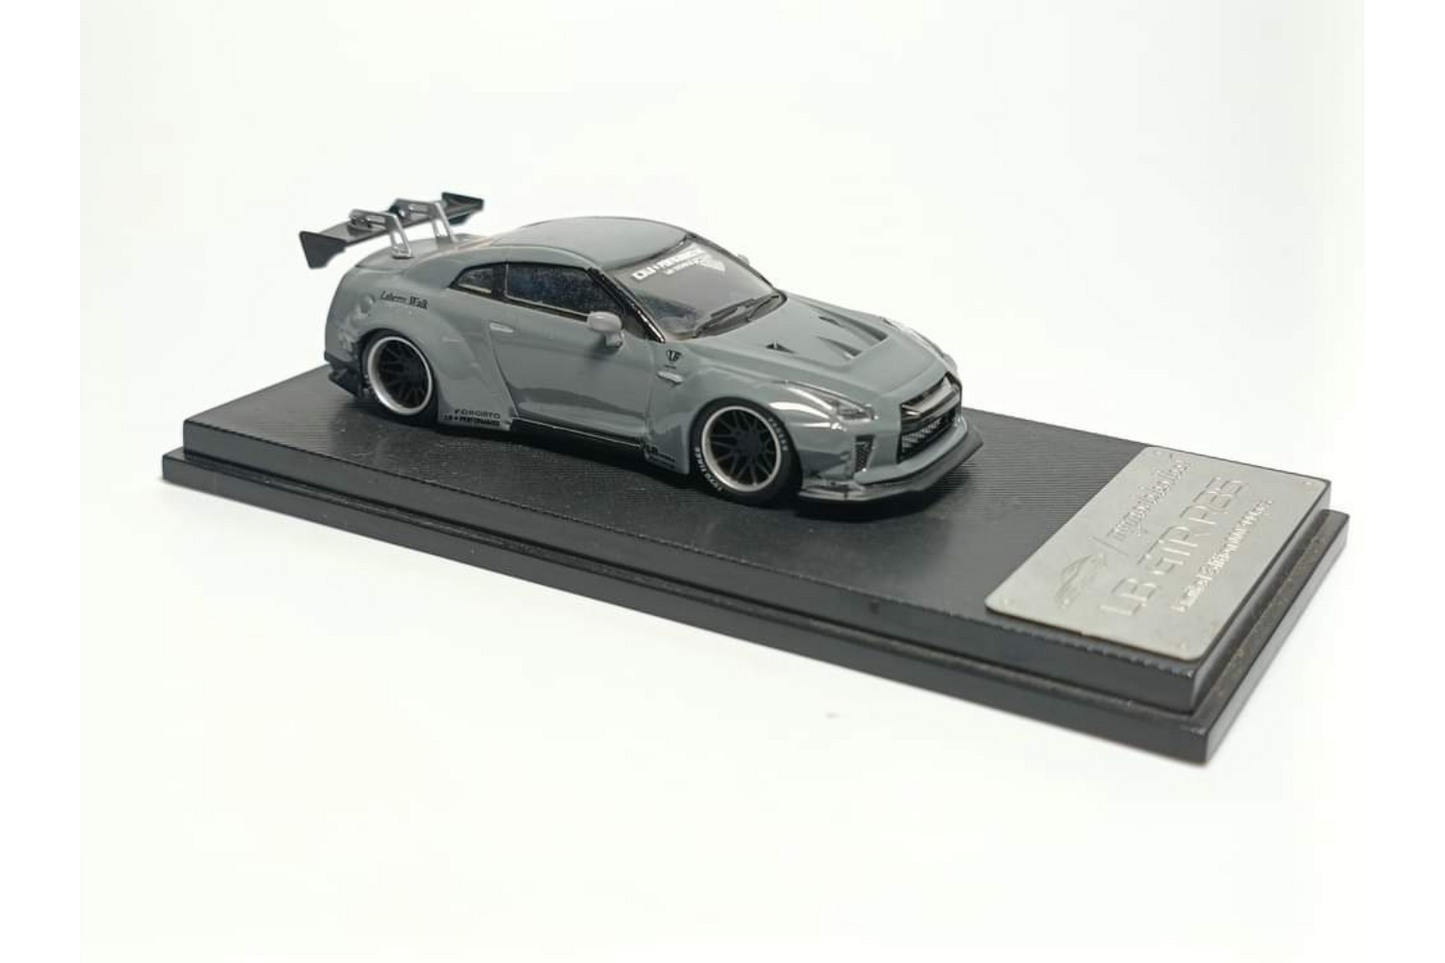 MC 1/64 LB-WORKS Nissan GT-R R35 Version 1.5 in Cement Gray